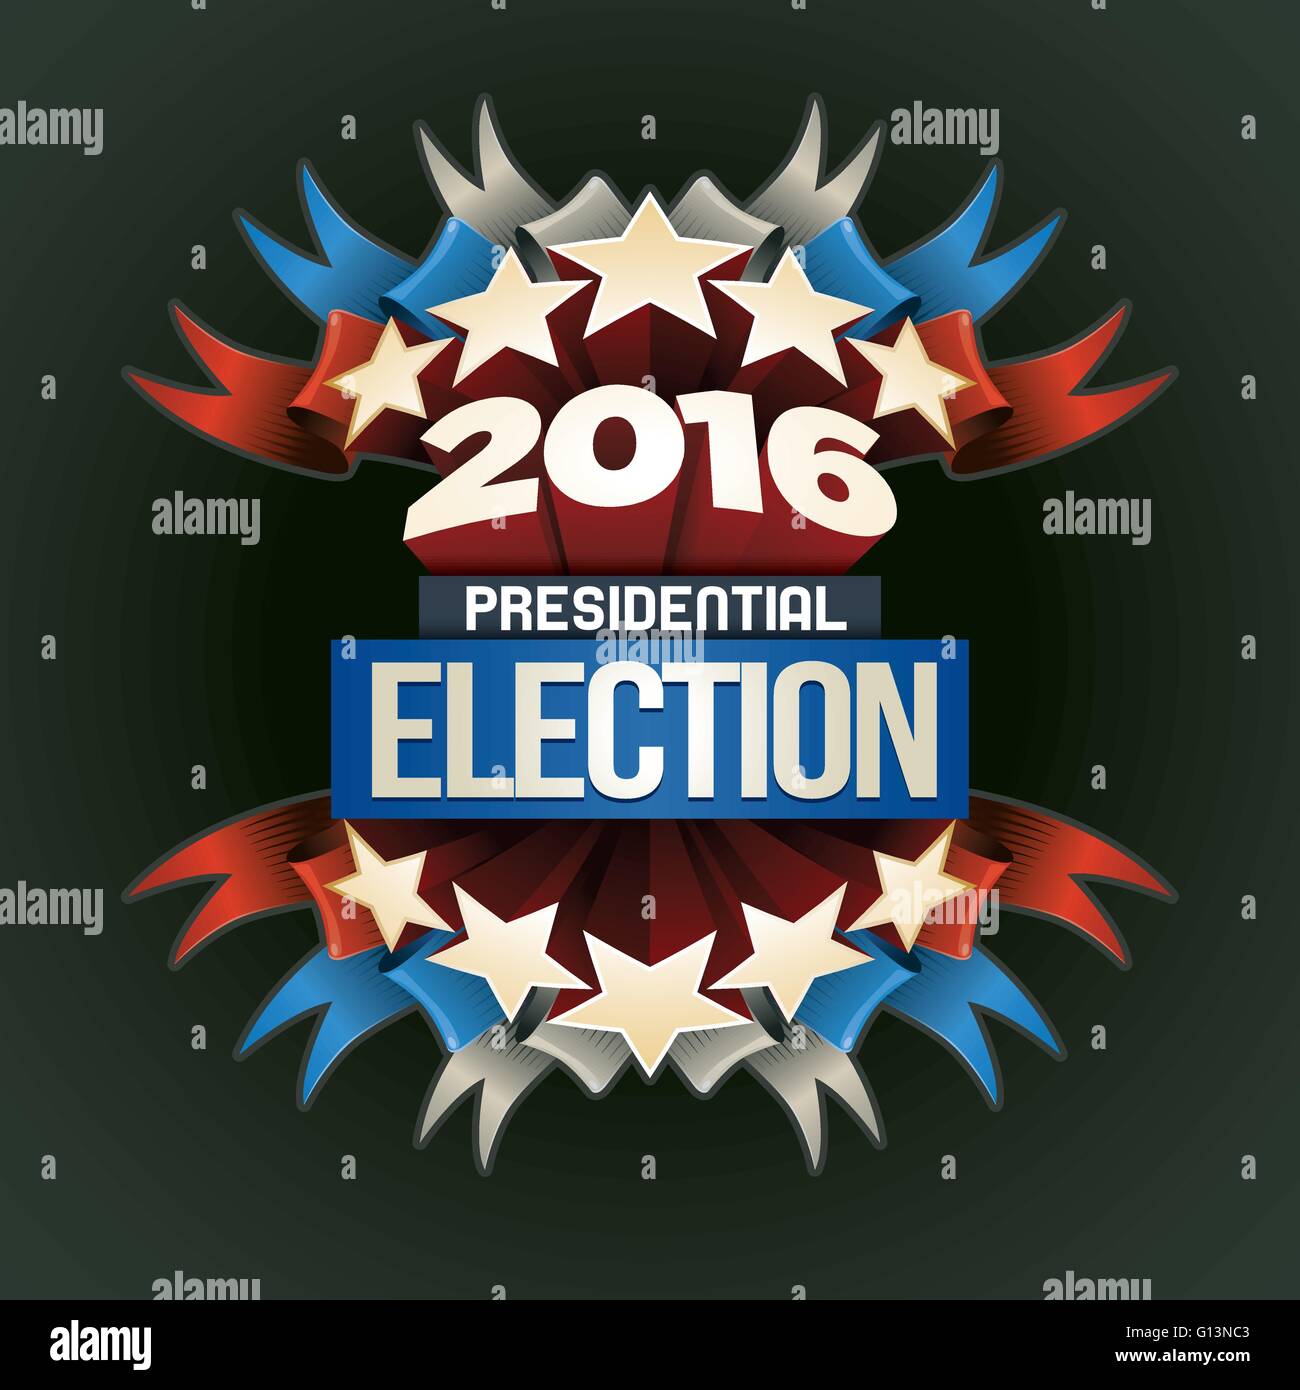 Year 2016 Presidential Election Design. Elements are layered separately in vector file. Stock Vector